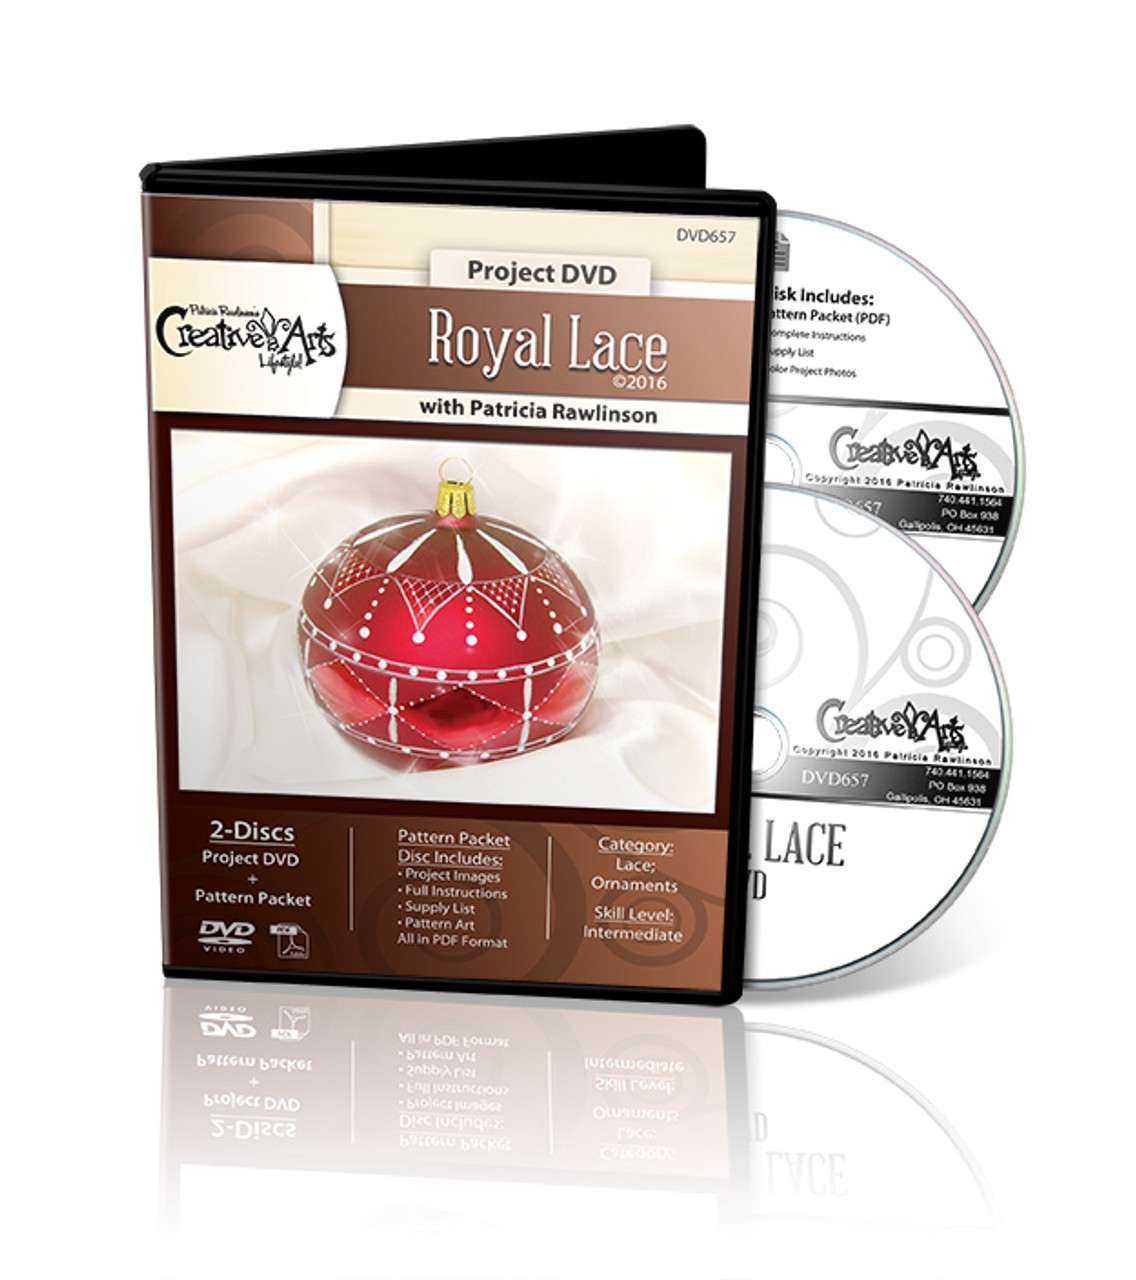 Royal Lace - DVD and Pattern Packet - Patricia Rawlinson